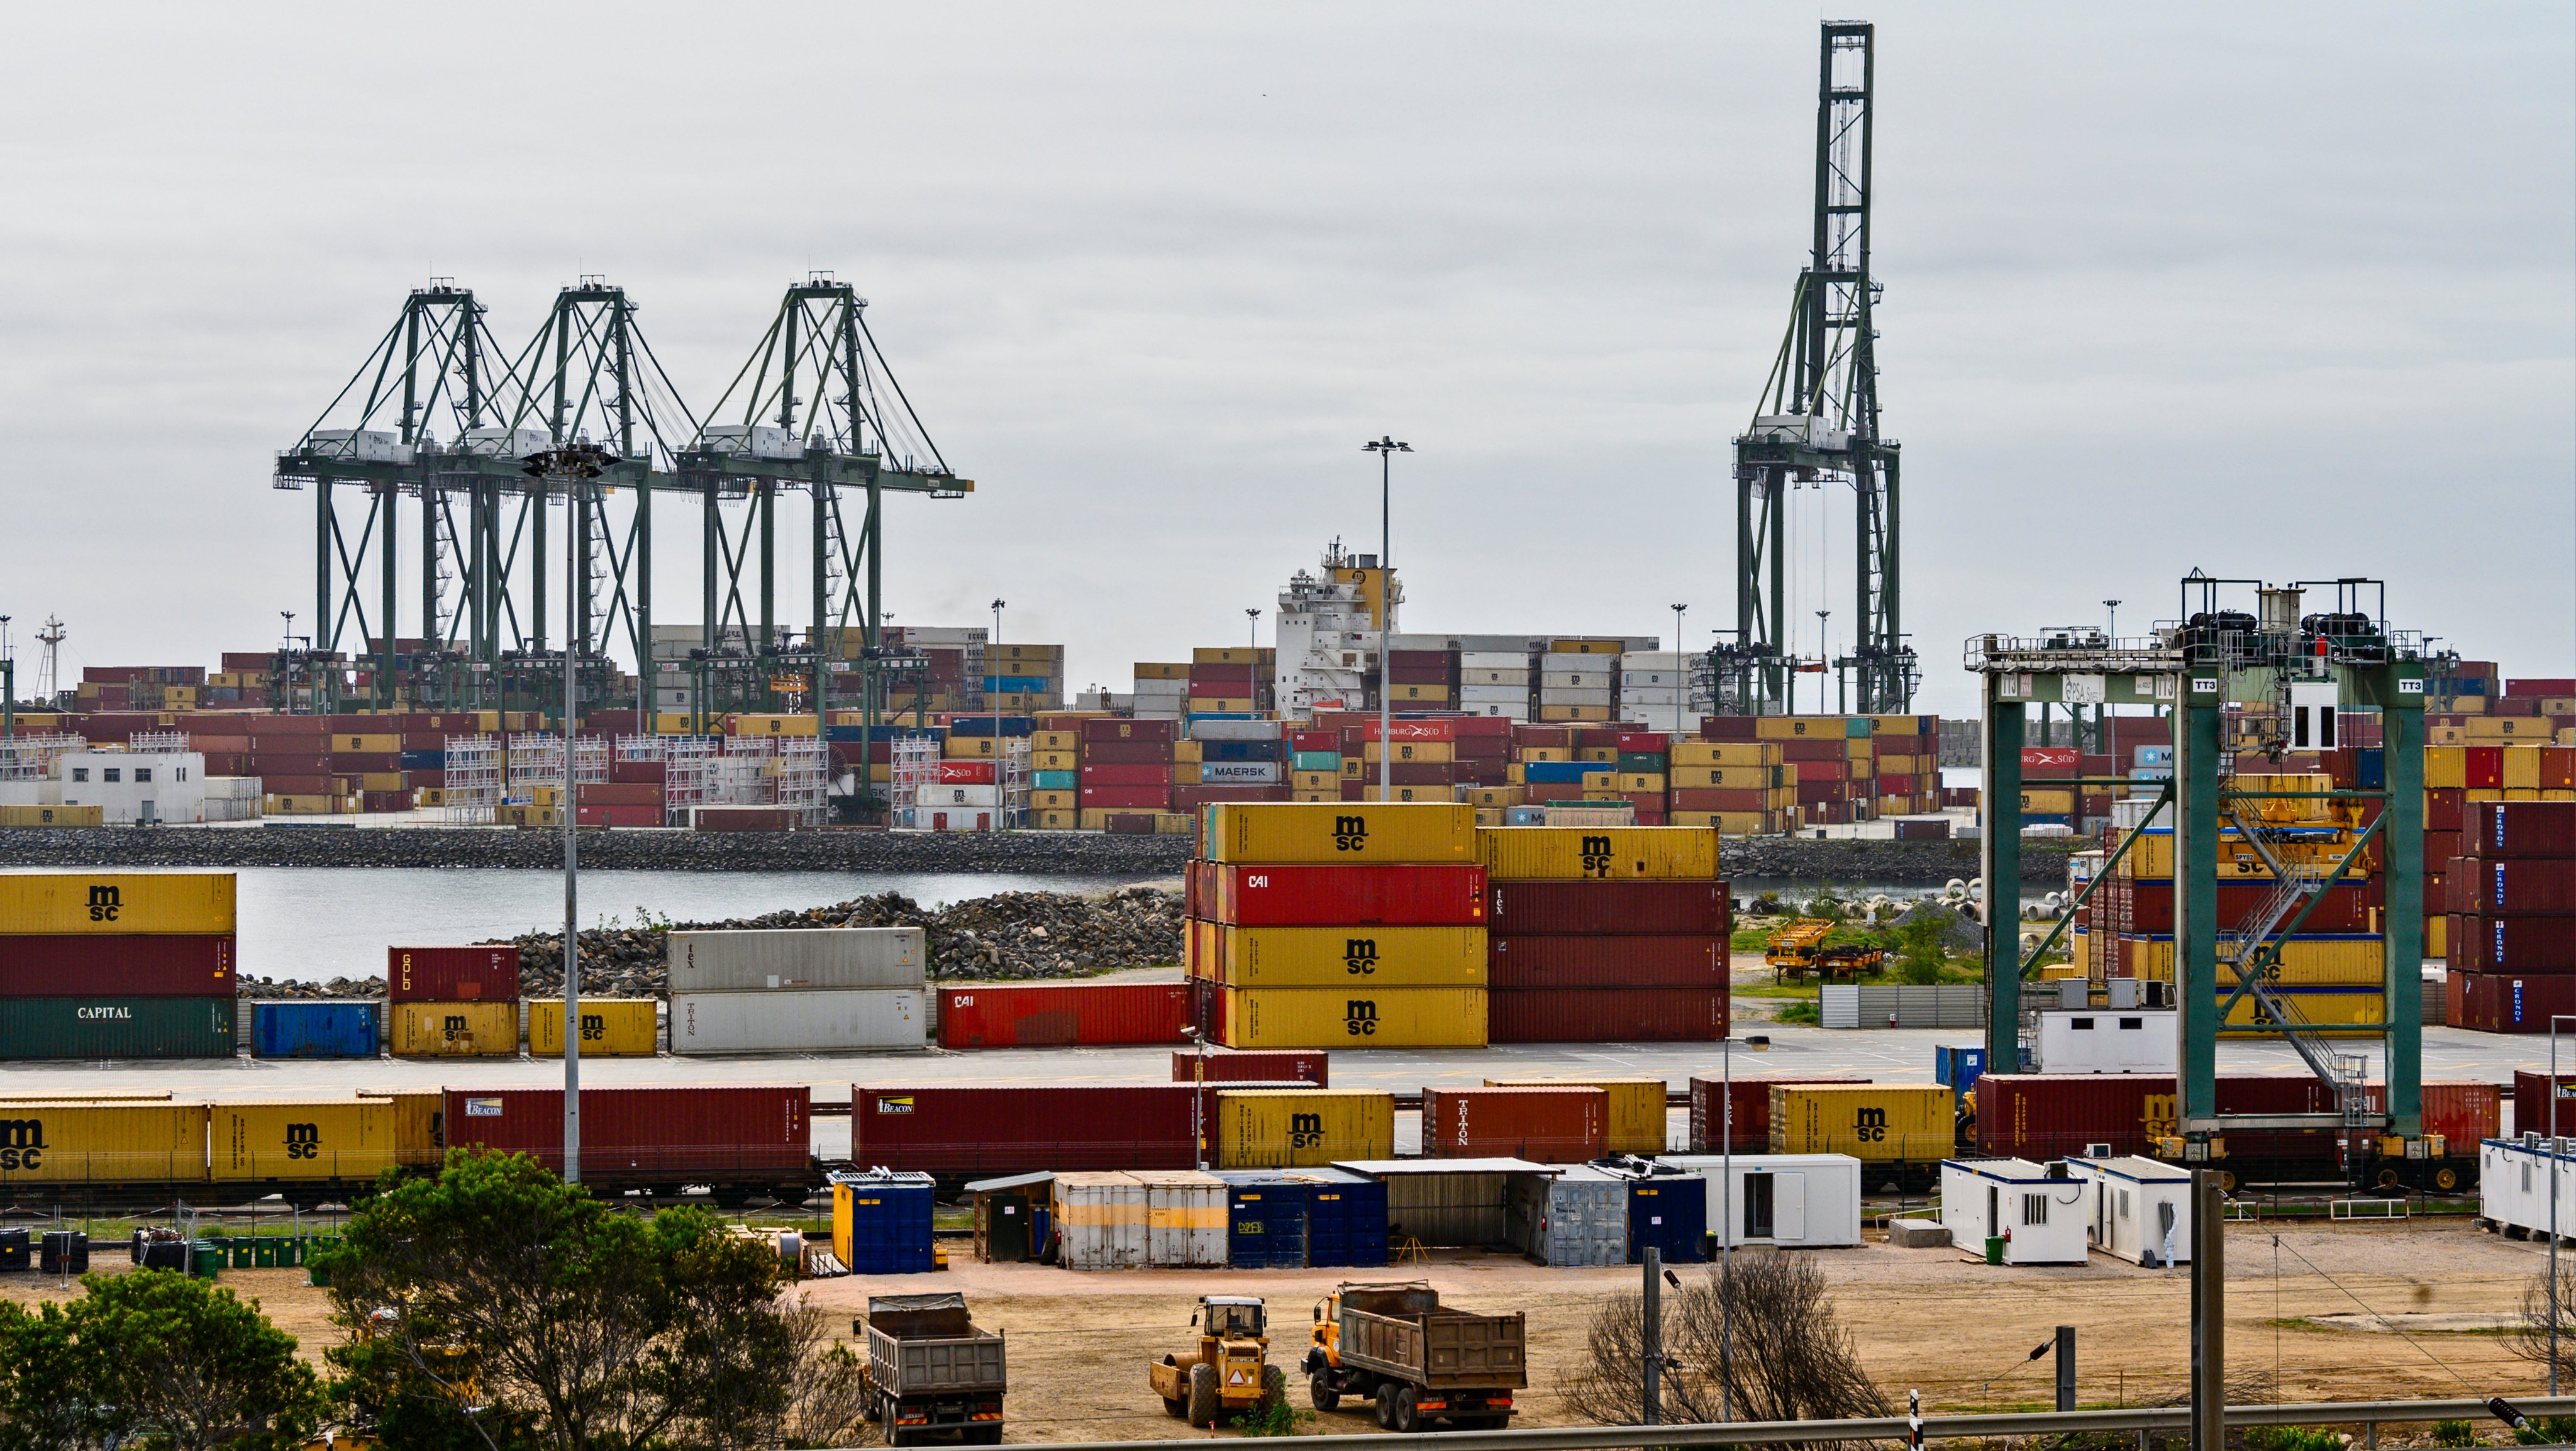 PSA Containers Terminal XXI in the Port of Sines, Portugal